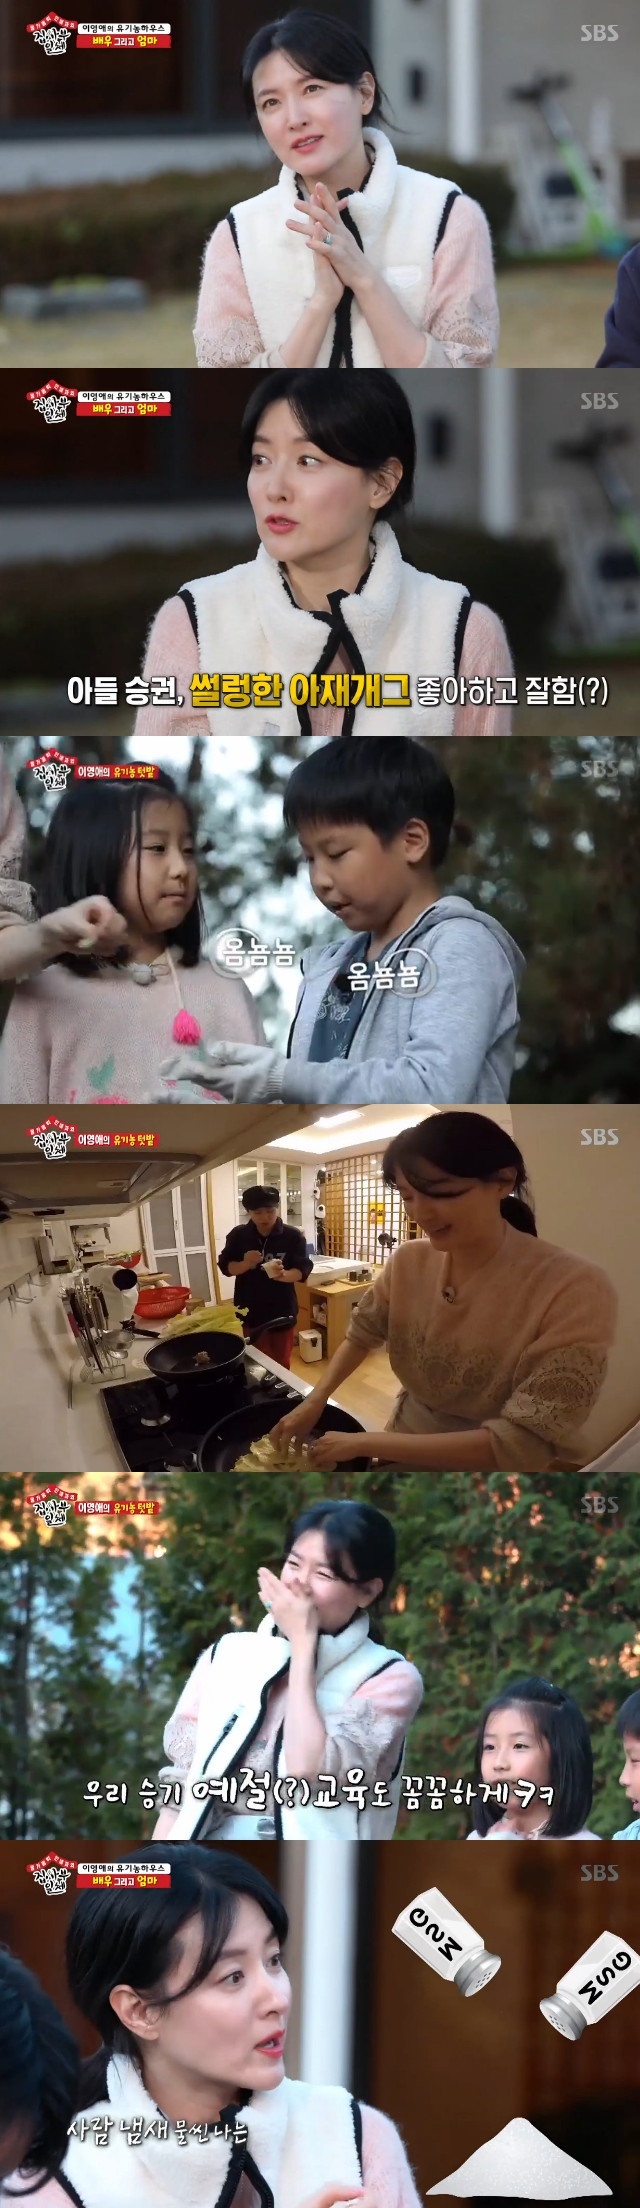 Seoul=) = Master Lee Yeong-ae showed a new attraction.On SBS All The Butlers, which was broadcast on the afternoon of the 24th, actor Lee Yeong-ae appeared as a master and spent a day with Lee Sang-yoon Lee Seung-gi Yang Se-hyeong Sungjae.Lee Yeong-ae invited the rising figures to his home in Yangpyeong-gun, Gyeonggi-do; a single-family house with a wide Madang like Exercise.The rising figure, who opened the door and saw Lee Yeong-ae coming out of Madang, was busy hiding in surprise and shyness.Everyone admired Lee Yeong-aes real life and said, Lets be really beautiful.Lee Yeong-ae came out with her children; her son Jung Seung-kwon, and her daughter Jung Seung-bin, twin children, greeted her with a bright figure.Lee Yeong-ae said: The kids are in the second grade of elementary school and they moved to Seoul because they had to go to school.I often come down here, but I invited it because I thought it would be good today. Lee Yeong-ae took the members with him, saying that there was a cabbage field near the house; he asked them to pick cabbage and radish with his distinctive soft tone.The members unwittingly followed Lee Yeong-aes words.Lee Yeong-ae learned Korean cuisine during Dae Jang Geum and said that he still mainly learns Korean food and likes Korean food.However, Lee Yeong-aes daughter laughed at the members by saying that she liked spaghetti during the dishes her mother gave.The early conversation was awkward, too: everyone was nervous about their conversation with Lee Yeong-ae, who said: Ive been a person Ive liked since I was so young.Wasnt it the ideal type of all men in Korea? Lee Yeong-ae said, Did I make it too uncomfortable?I used to cut my fingers while shooting Dae Jang Geum, but I sutured without anesthesia, he said.Lee Yeong-ae also caut after members failed to believe they had done finger sutures without anesthesia.Yook Sungjae laughed, saying, Vease is completely organic, but talk seems to hit some MSG.Lee Yeong-ae said of his image, There is a CF image, it seems to be elegant or all that is preconceived.I am also a person who shouts and angers at children, he said. When children are polite, they are angry. I felt frustrated when I played (because of the image): after Dae Jang Geum, I found a transformation after kind Mr. Keumza.I have found a work that can erupt another energy that I have not seen in this movie. Lee Yeong-ae recently went to a BTS concert, which Lee Yeong-ae said: It was the first time I had a concert in such a big stadium, I havent been to a teenager.It was a new sight for me in itself. I told my junior, I will be singer when I am born again. It was different from what an actor could feel.If the master does idol, it is one tower and olkill. Lee Yeong-ae said, Who will do it?I want to do my heart now, he said. I think the new challenge will be fun. Lee Yeong-ae spent time with Yang Se-hyeong making naturalistic food.Yook Sungjae Lee Seung-gi took piano lessons with her daughter Seung Bin Yang, and Lee Sang-yoon became a family of Lee Yeong-ae, spending time with her son, Seung Kwon, who was interested in mathematics.